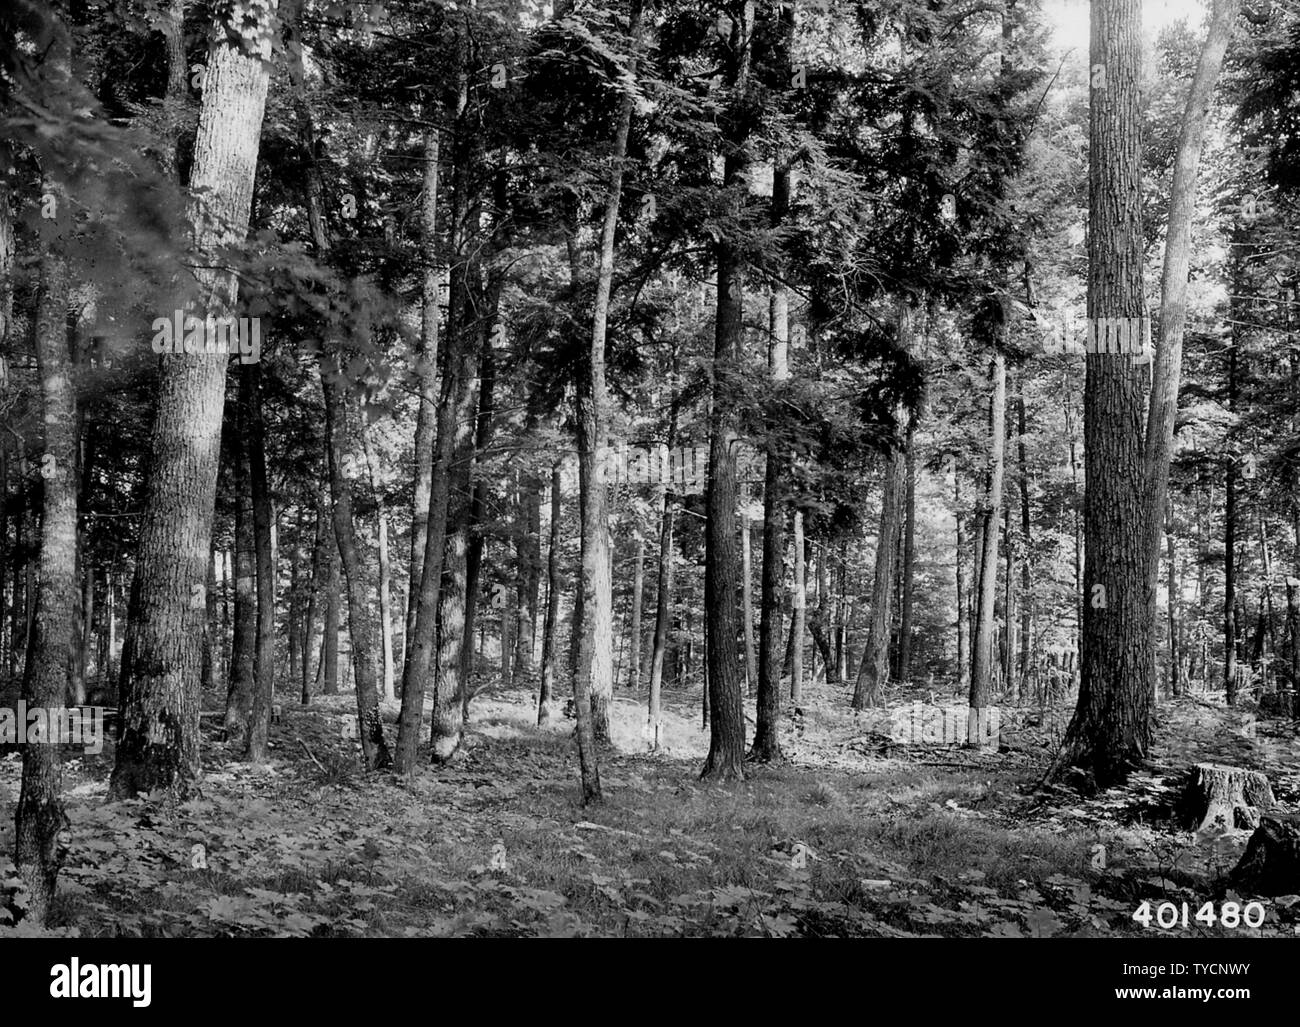 Photograph of Mixed Stand of Basswood, Maple and Yellow Birch After Selective Logging; Scope and content:  Original caption: Mixed stand of basswood, maple and yellow birch after selective logging in which 4500 bd. ft. per acre was cut from stand which originally averaged 10,000 bd. ft. per acre. Note the lopping and scattering of slash. This area was logged in the winter of 19. Stock Photo